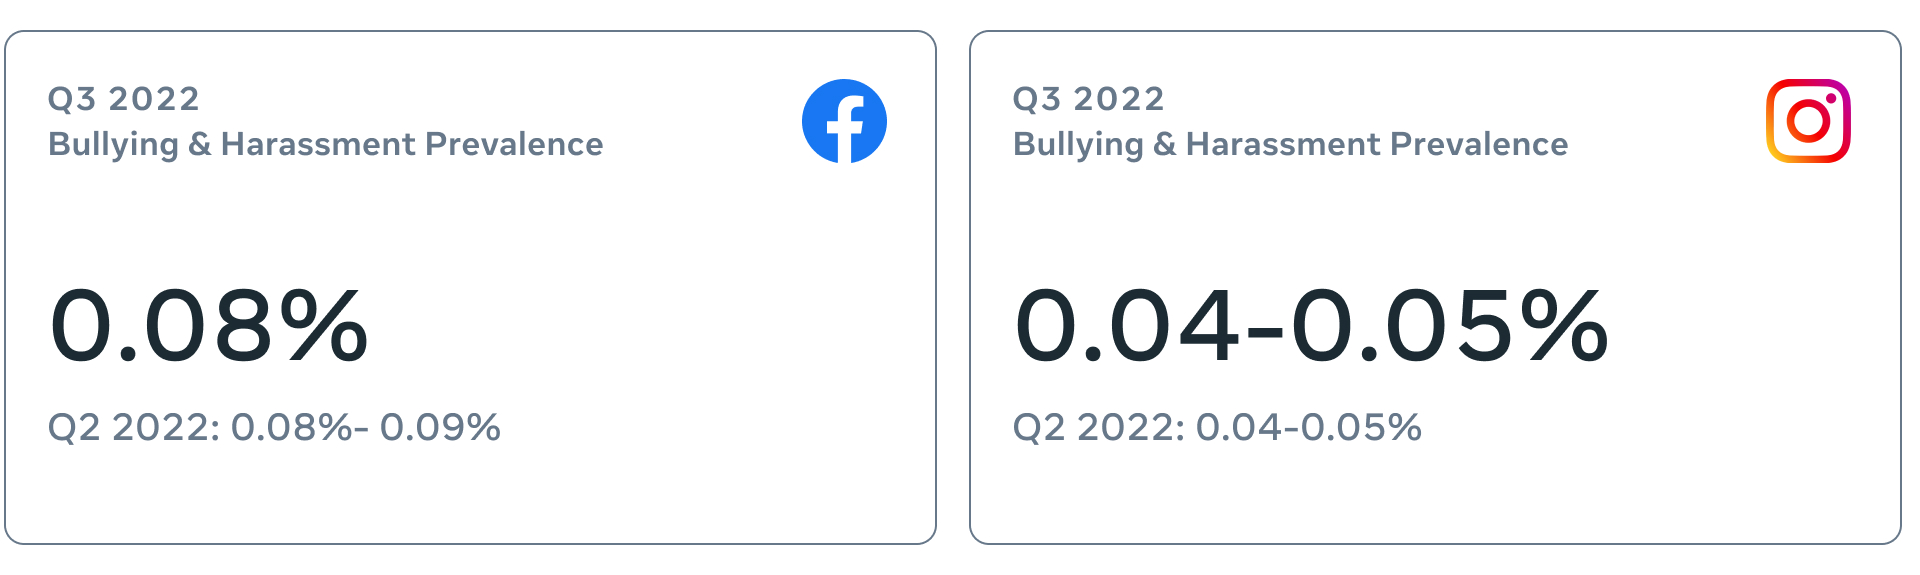 Bullying and harassment prevalence on Facebook and Instagram in Q3 2022.